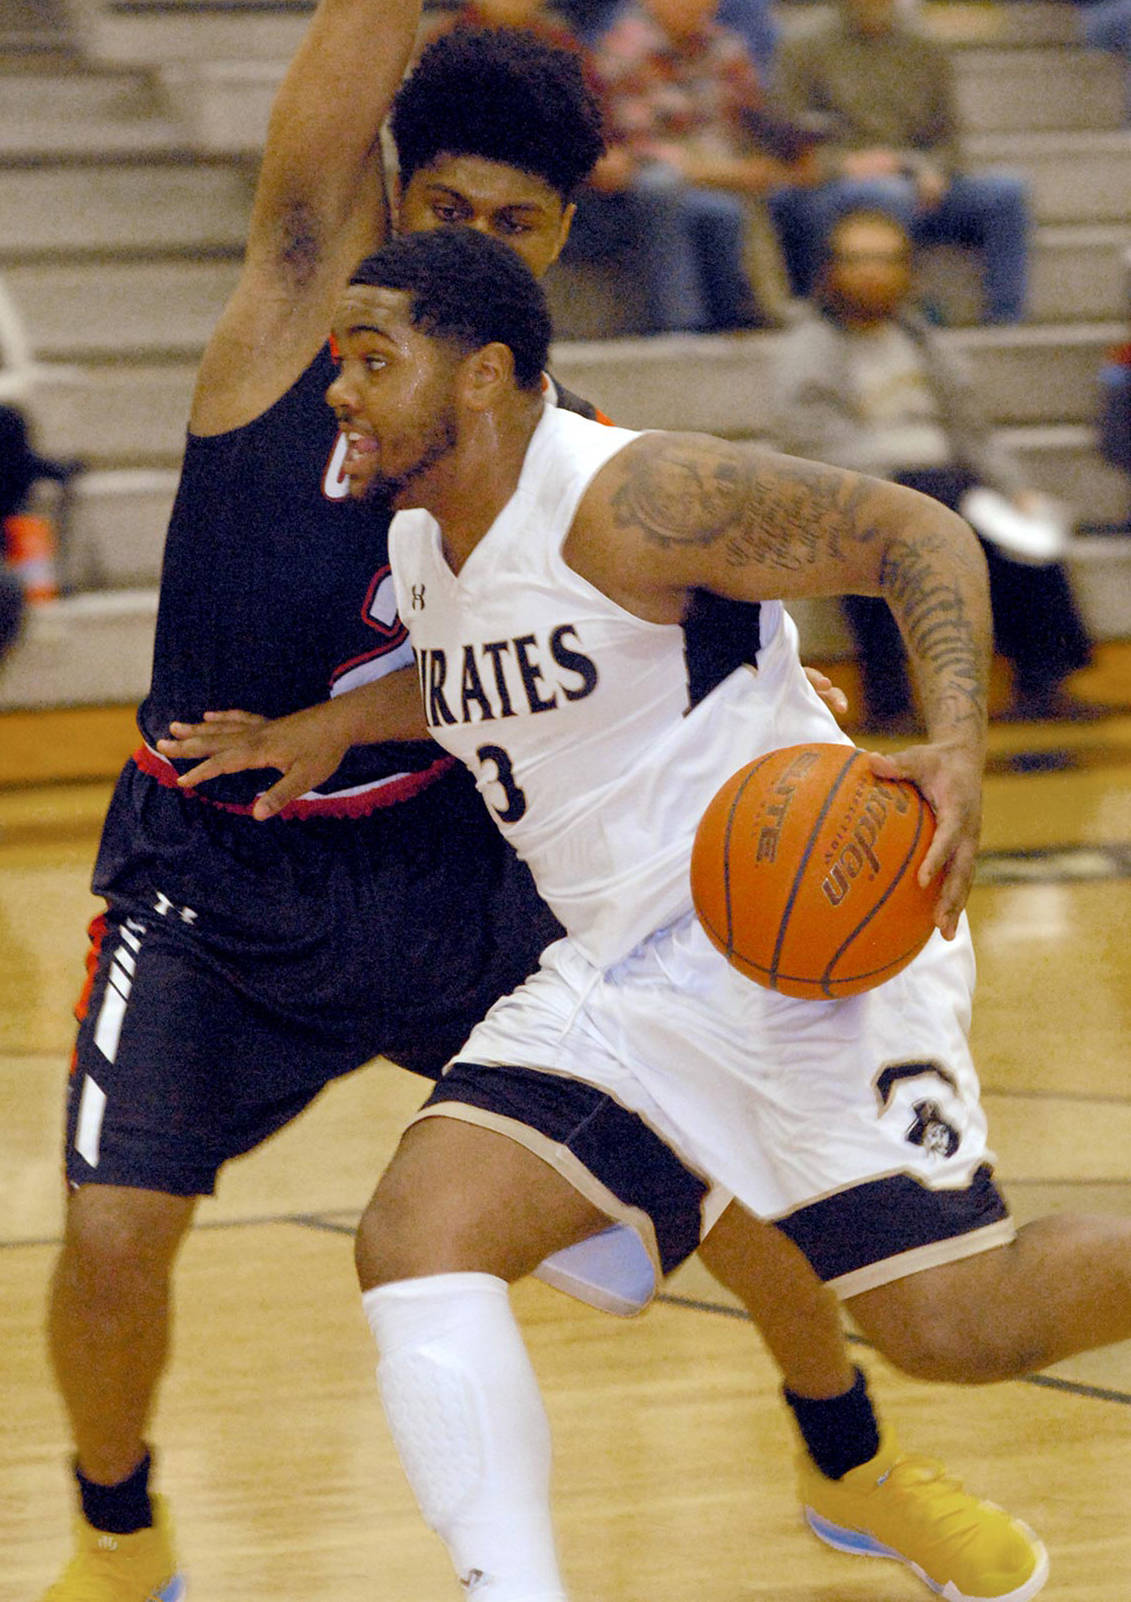 Peninsula’s Davien Harris-Williams drives past the defense of Olympic’s Will Johnson in the opening minutes of a conference match-up last season. Harris-Williams averaged 16.8 points per game and returns to lead the Pirates in 2019-2020. File photo by Keith Thorpe/Olympic Peninsula News Group